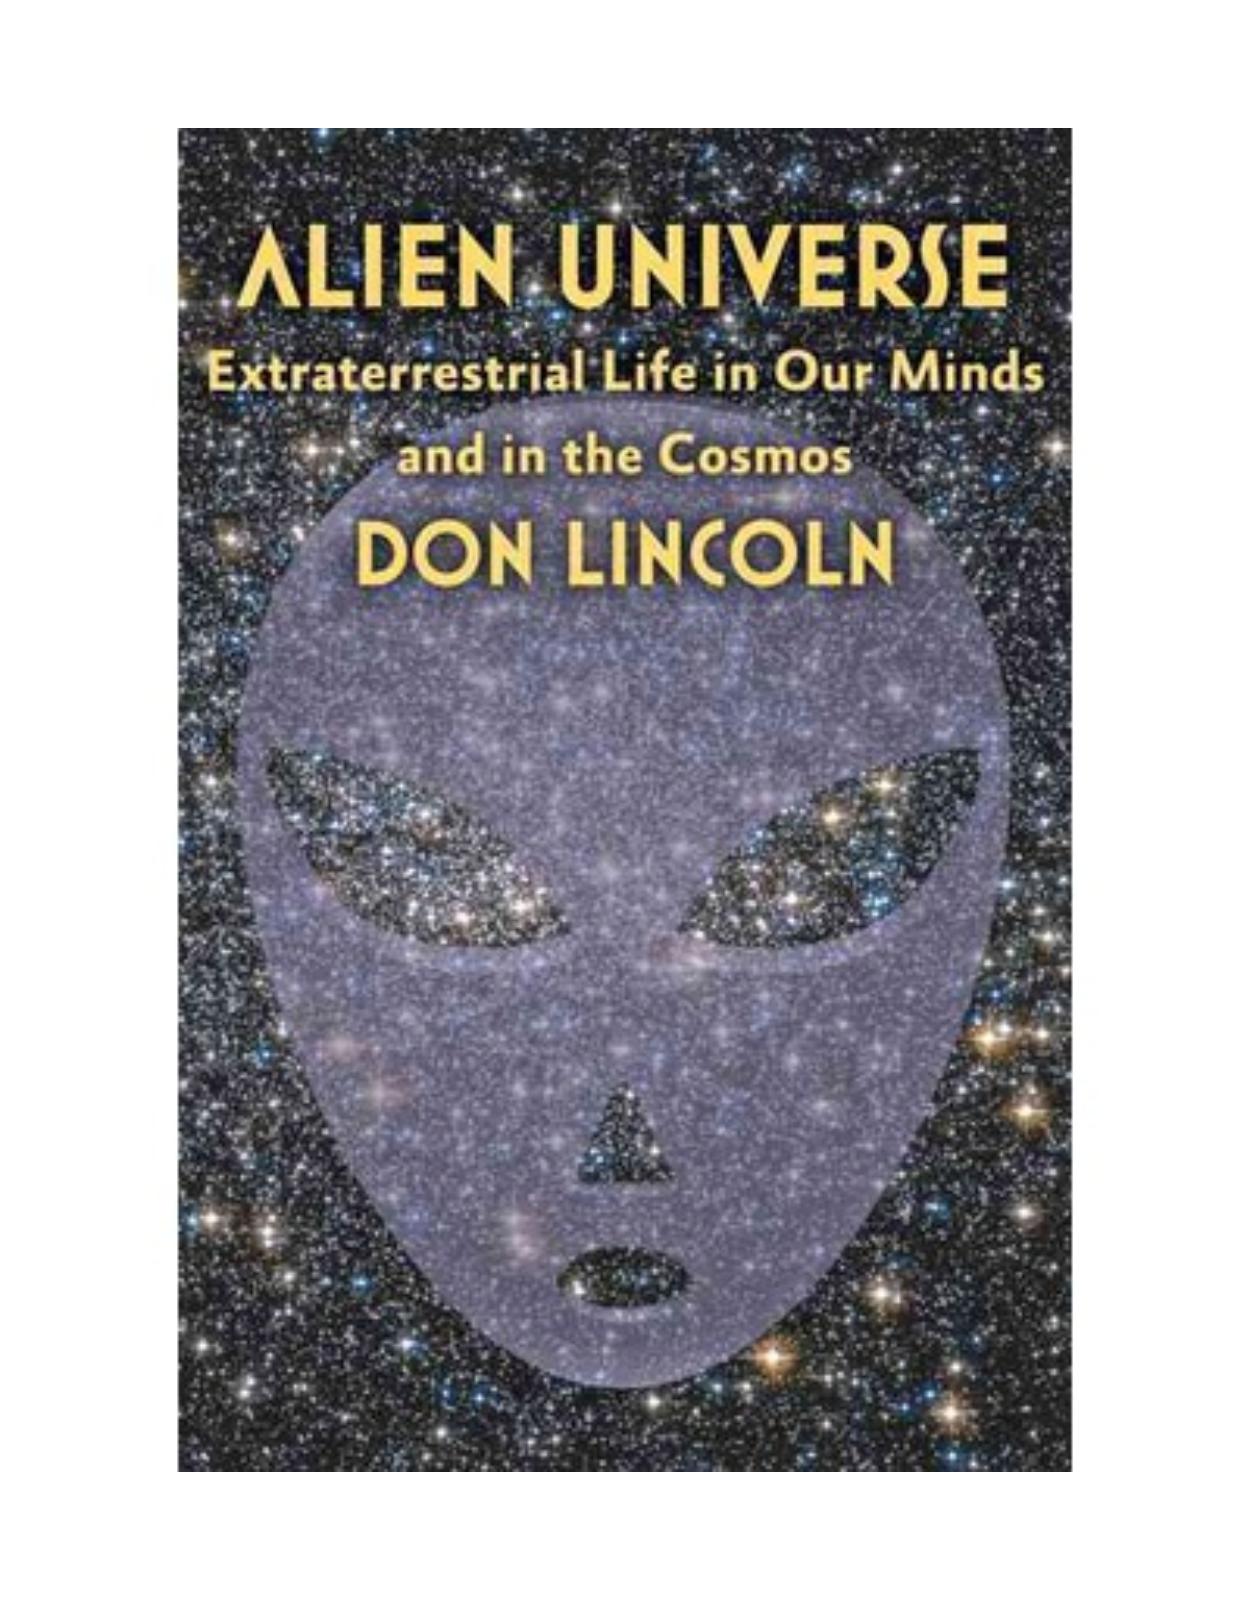 Alien Universe. Extraterrestrial Life in Our Minds and in the Cosmos